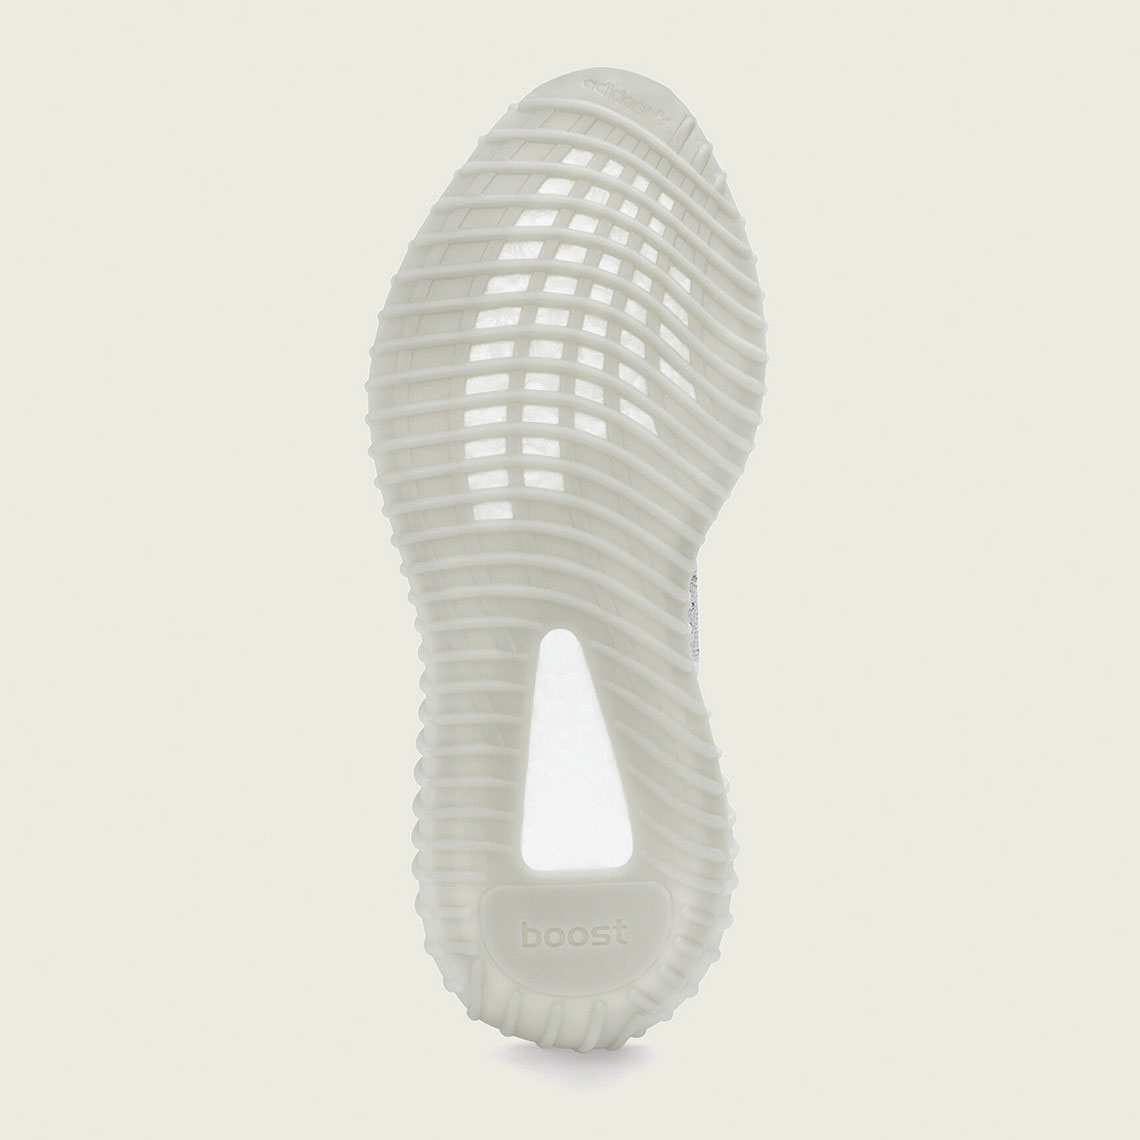 yeezy-boost-350-v2-tail-light-release-date-3